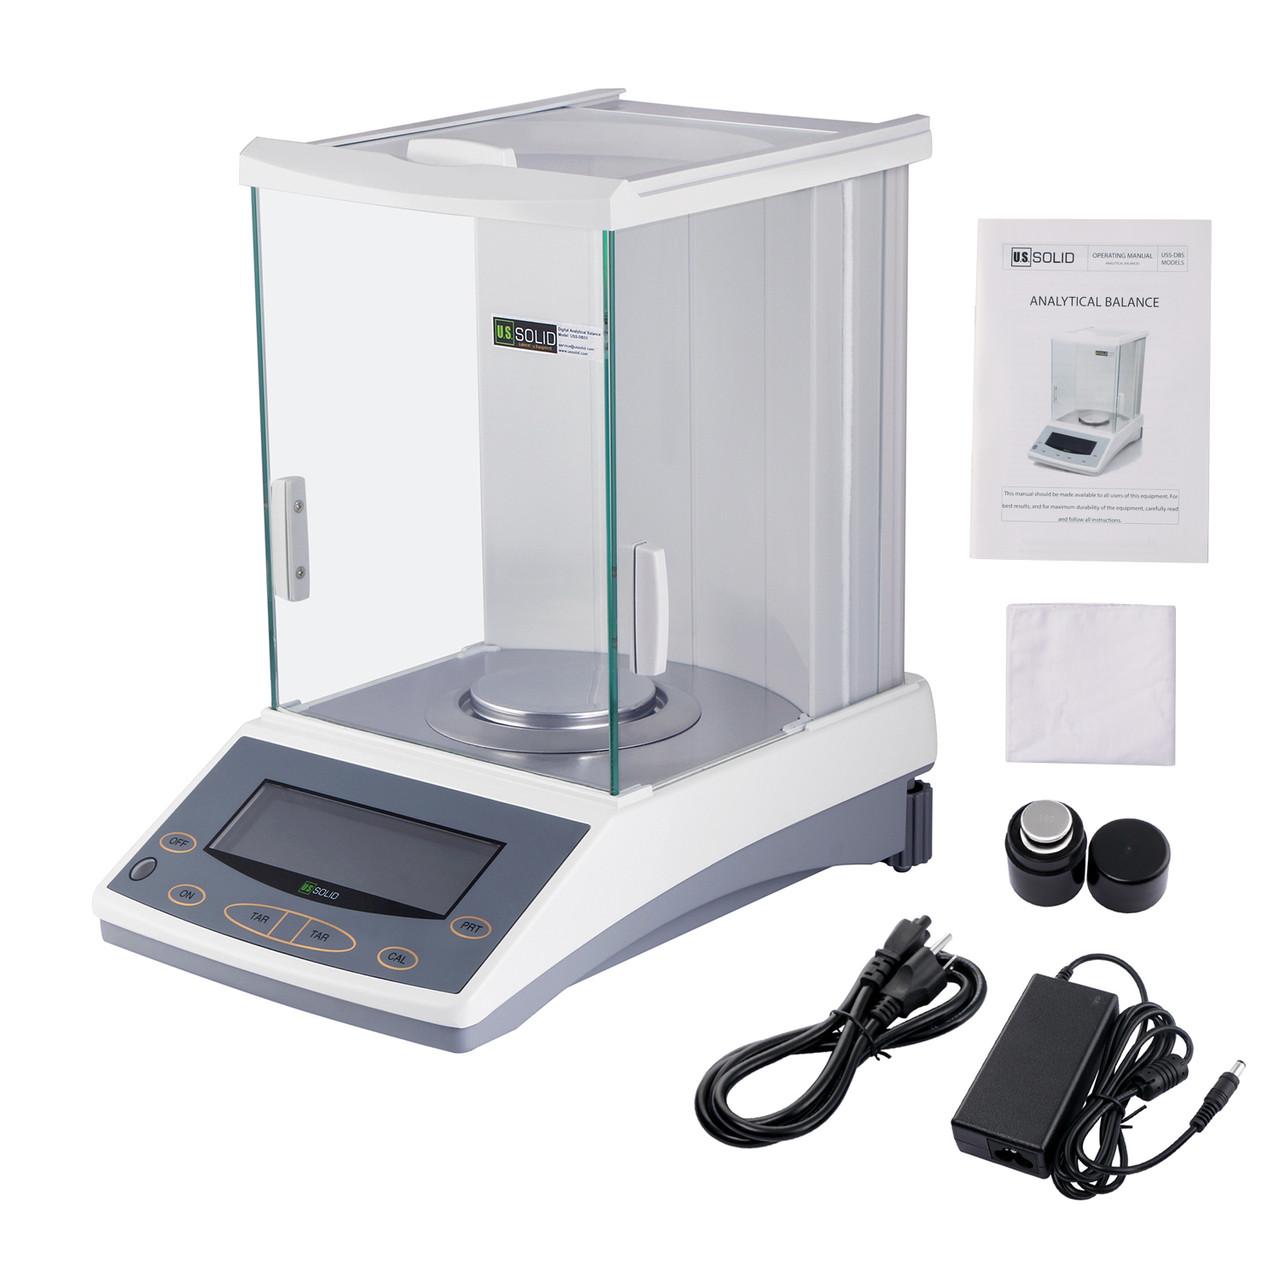 110g 0.1mg Digital Analytical Balance Scale for Laboratories